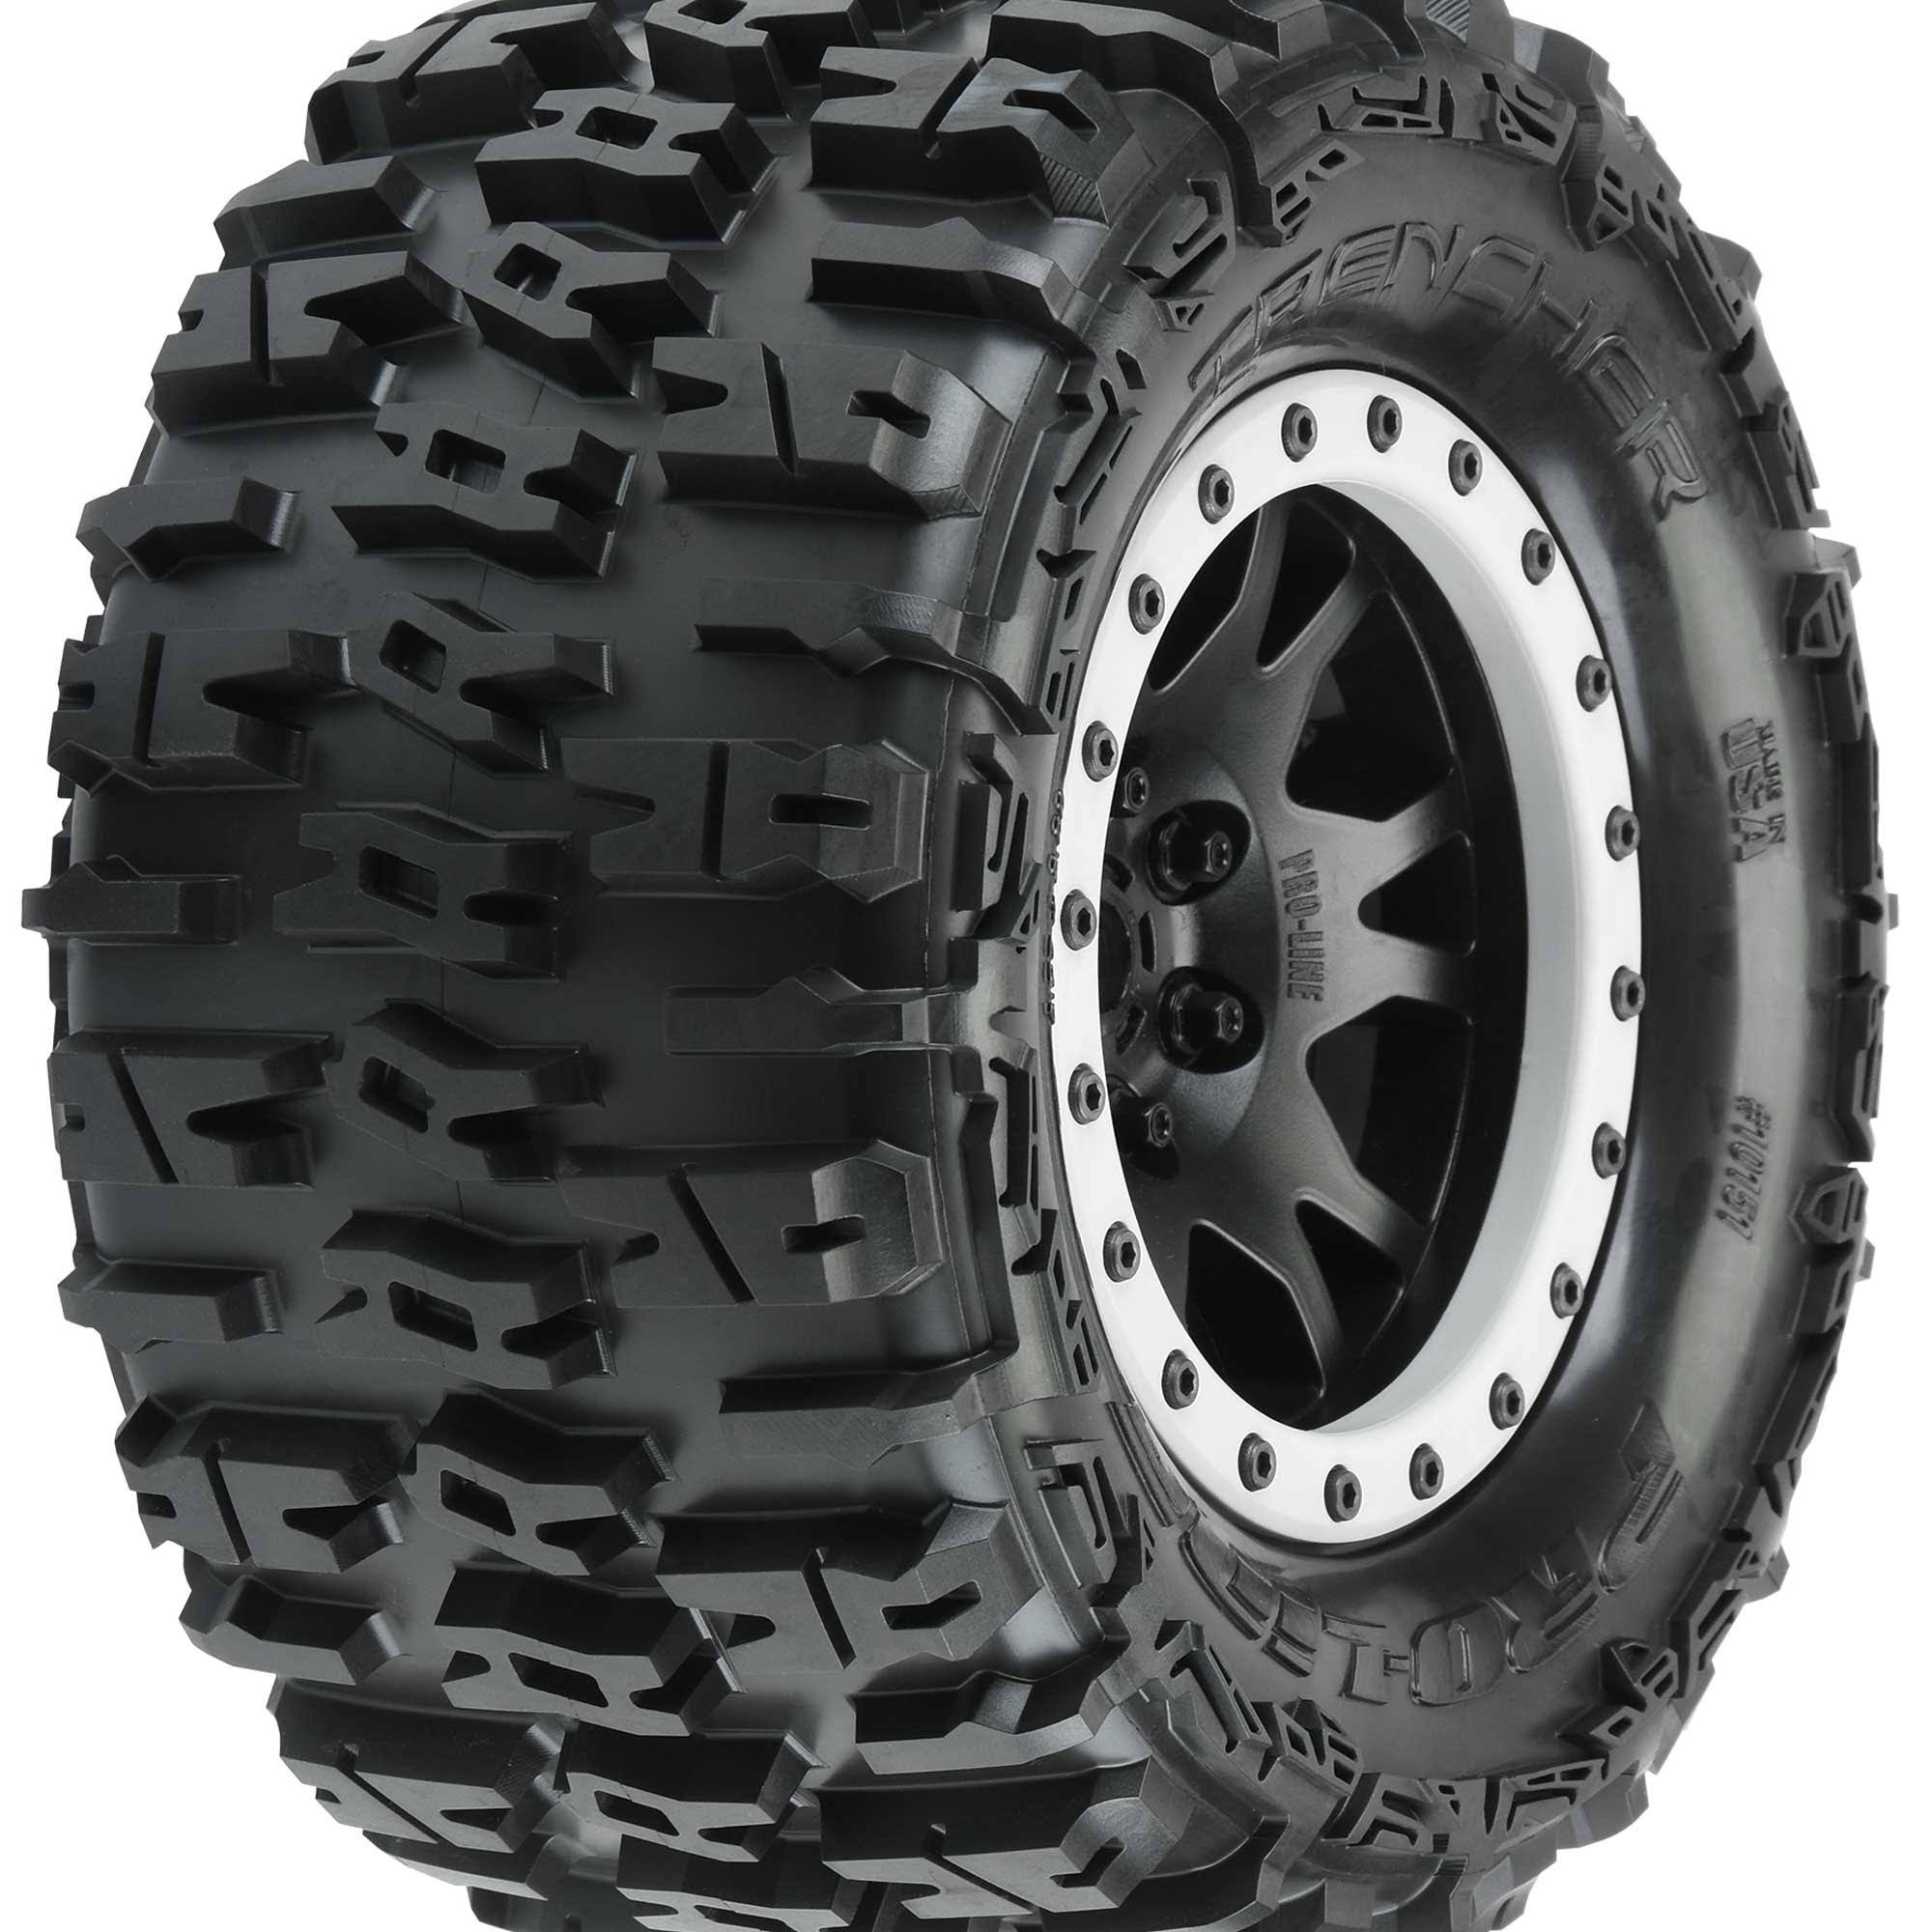 Proline Trencher Pro Loc All Terrain Tires - Pack of 2, 4.3"